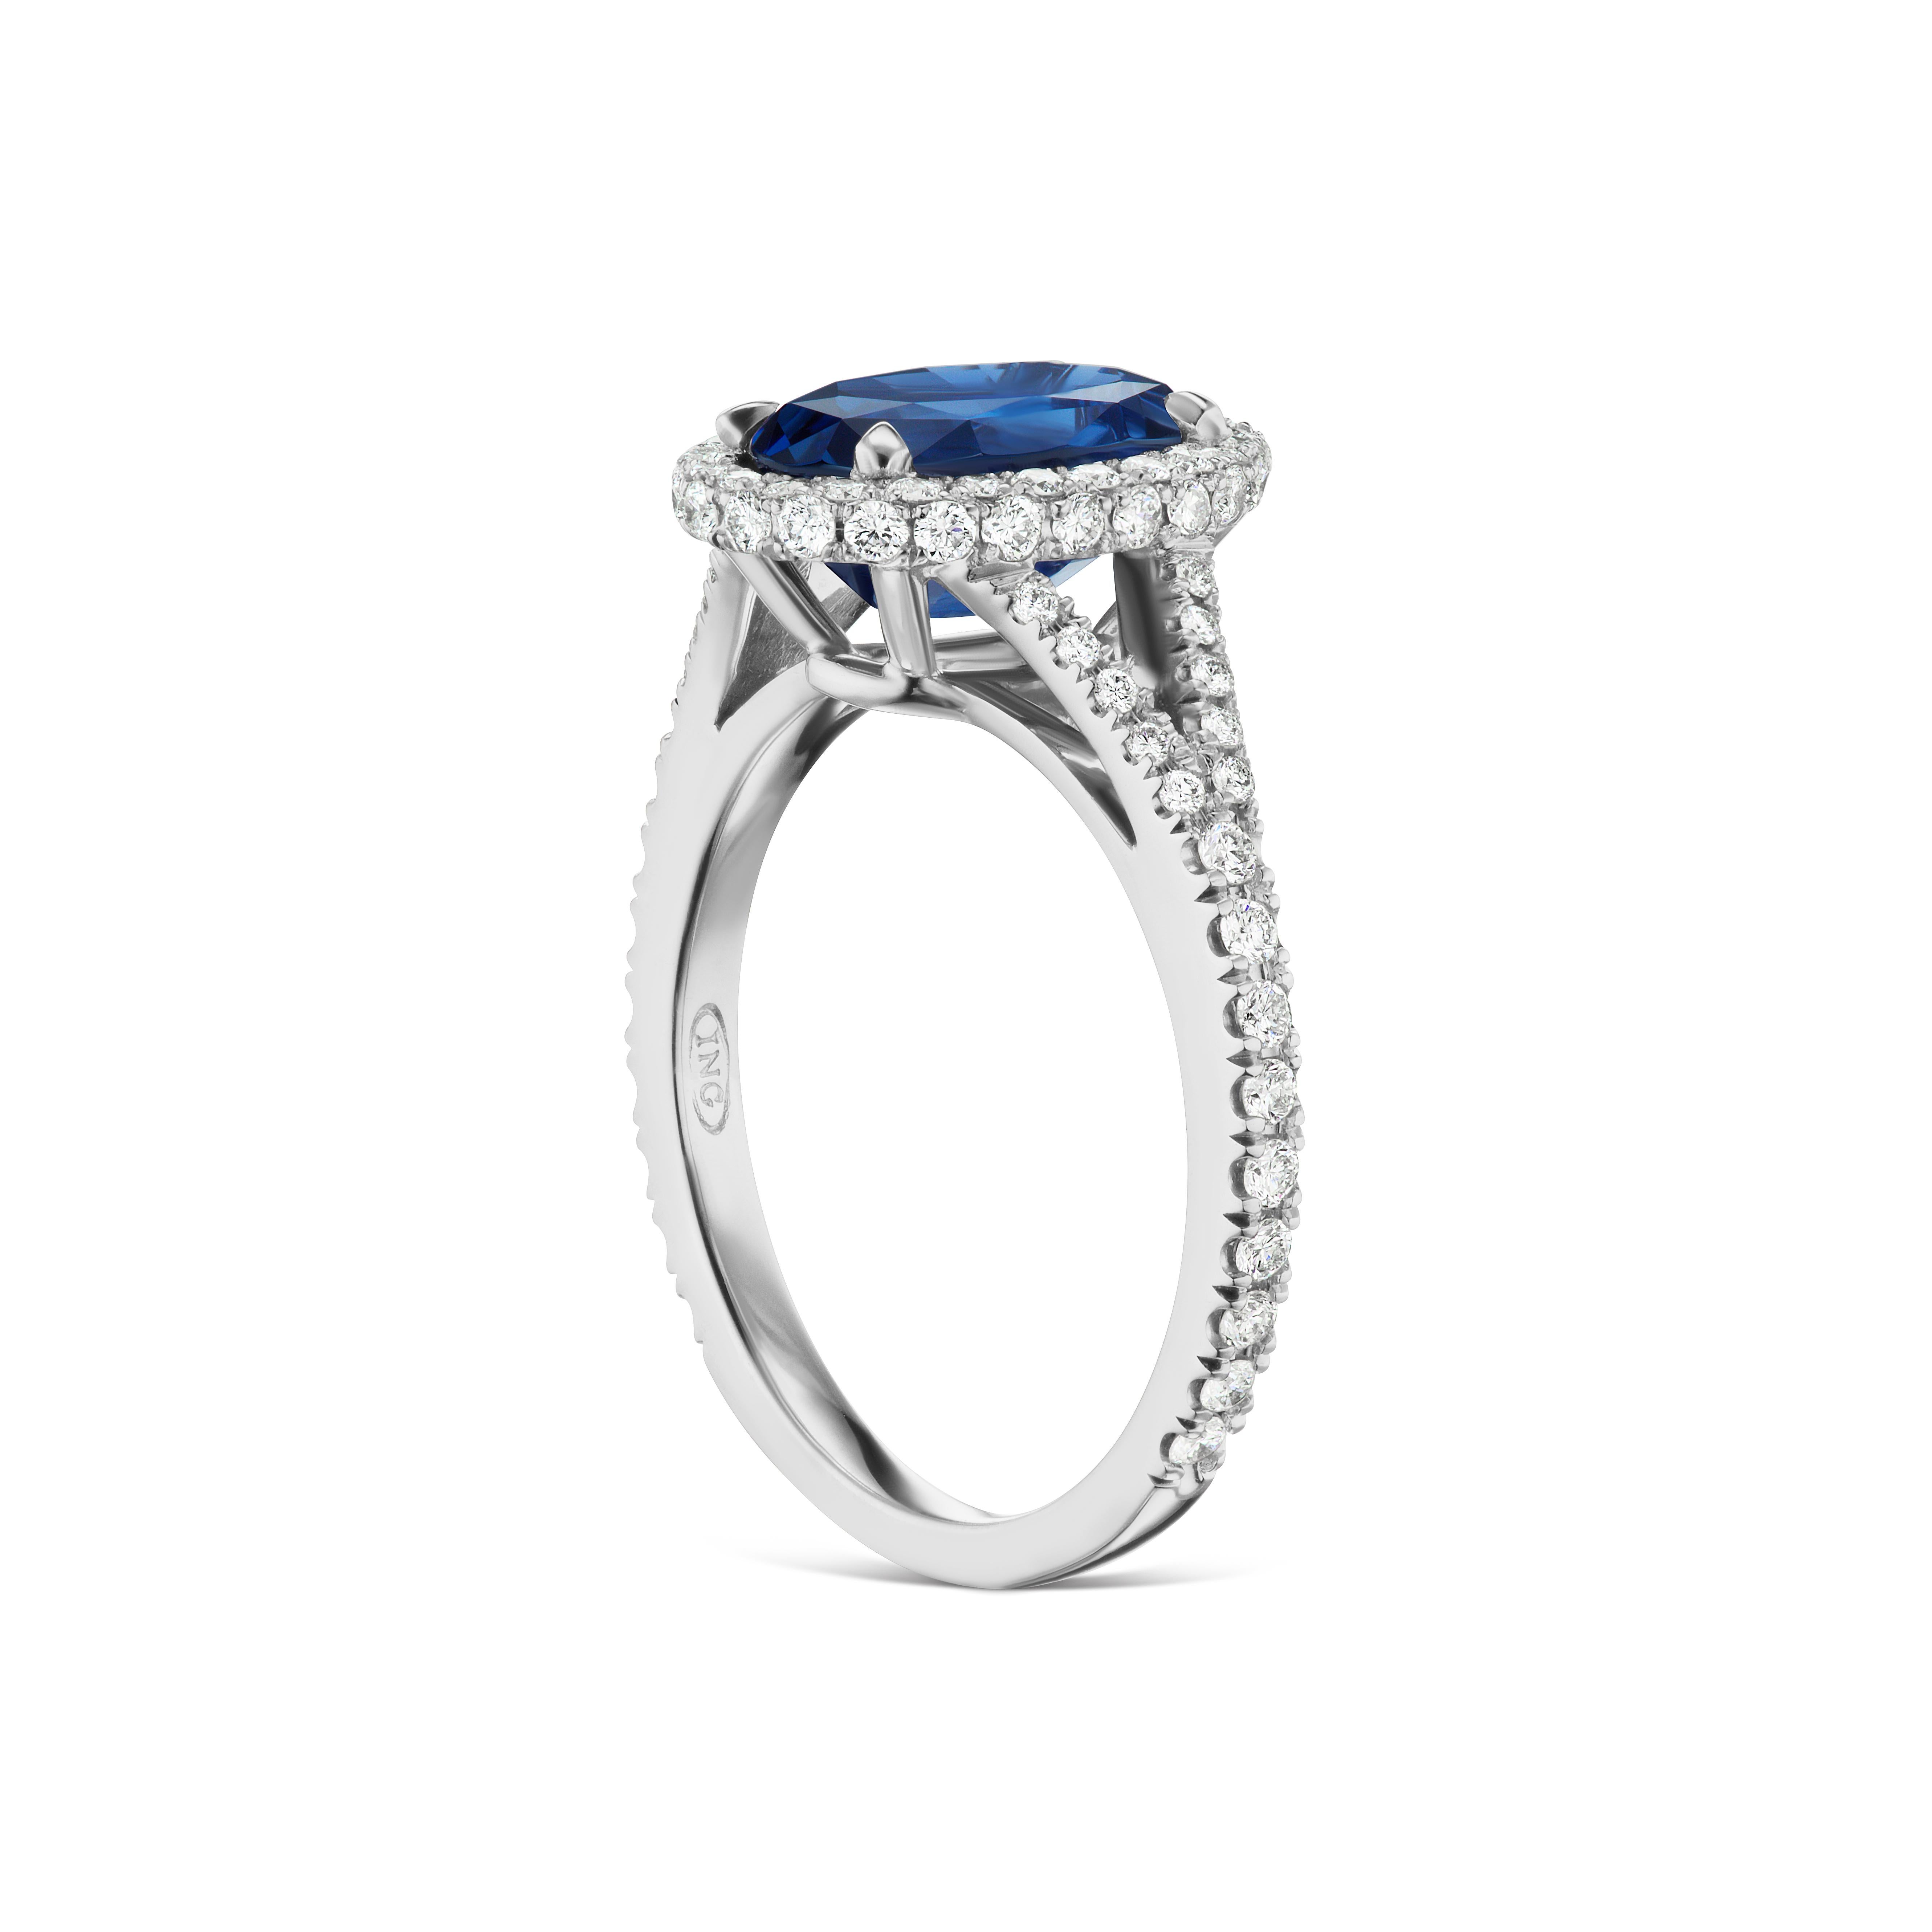 No Heat 2.97ct. GIA Certified Blue Sapphire set in a micro pave diamond halo with .63ct. total weight of FVS diamonds in 14kt.   If you don't see something, Say something! We would be happy to work with you to create your dream ring!